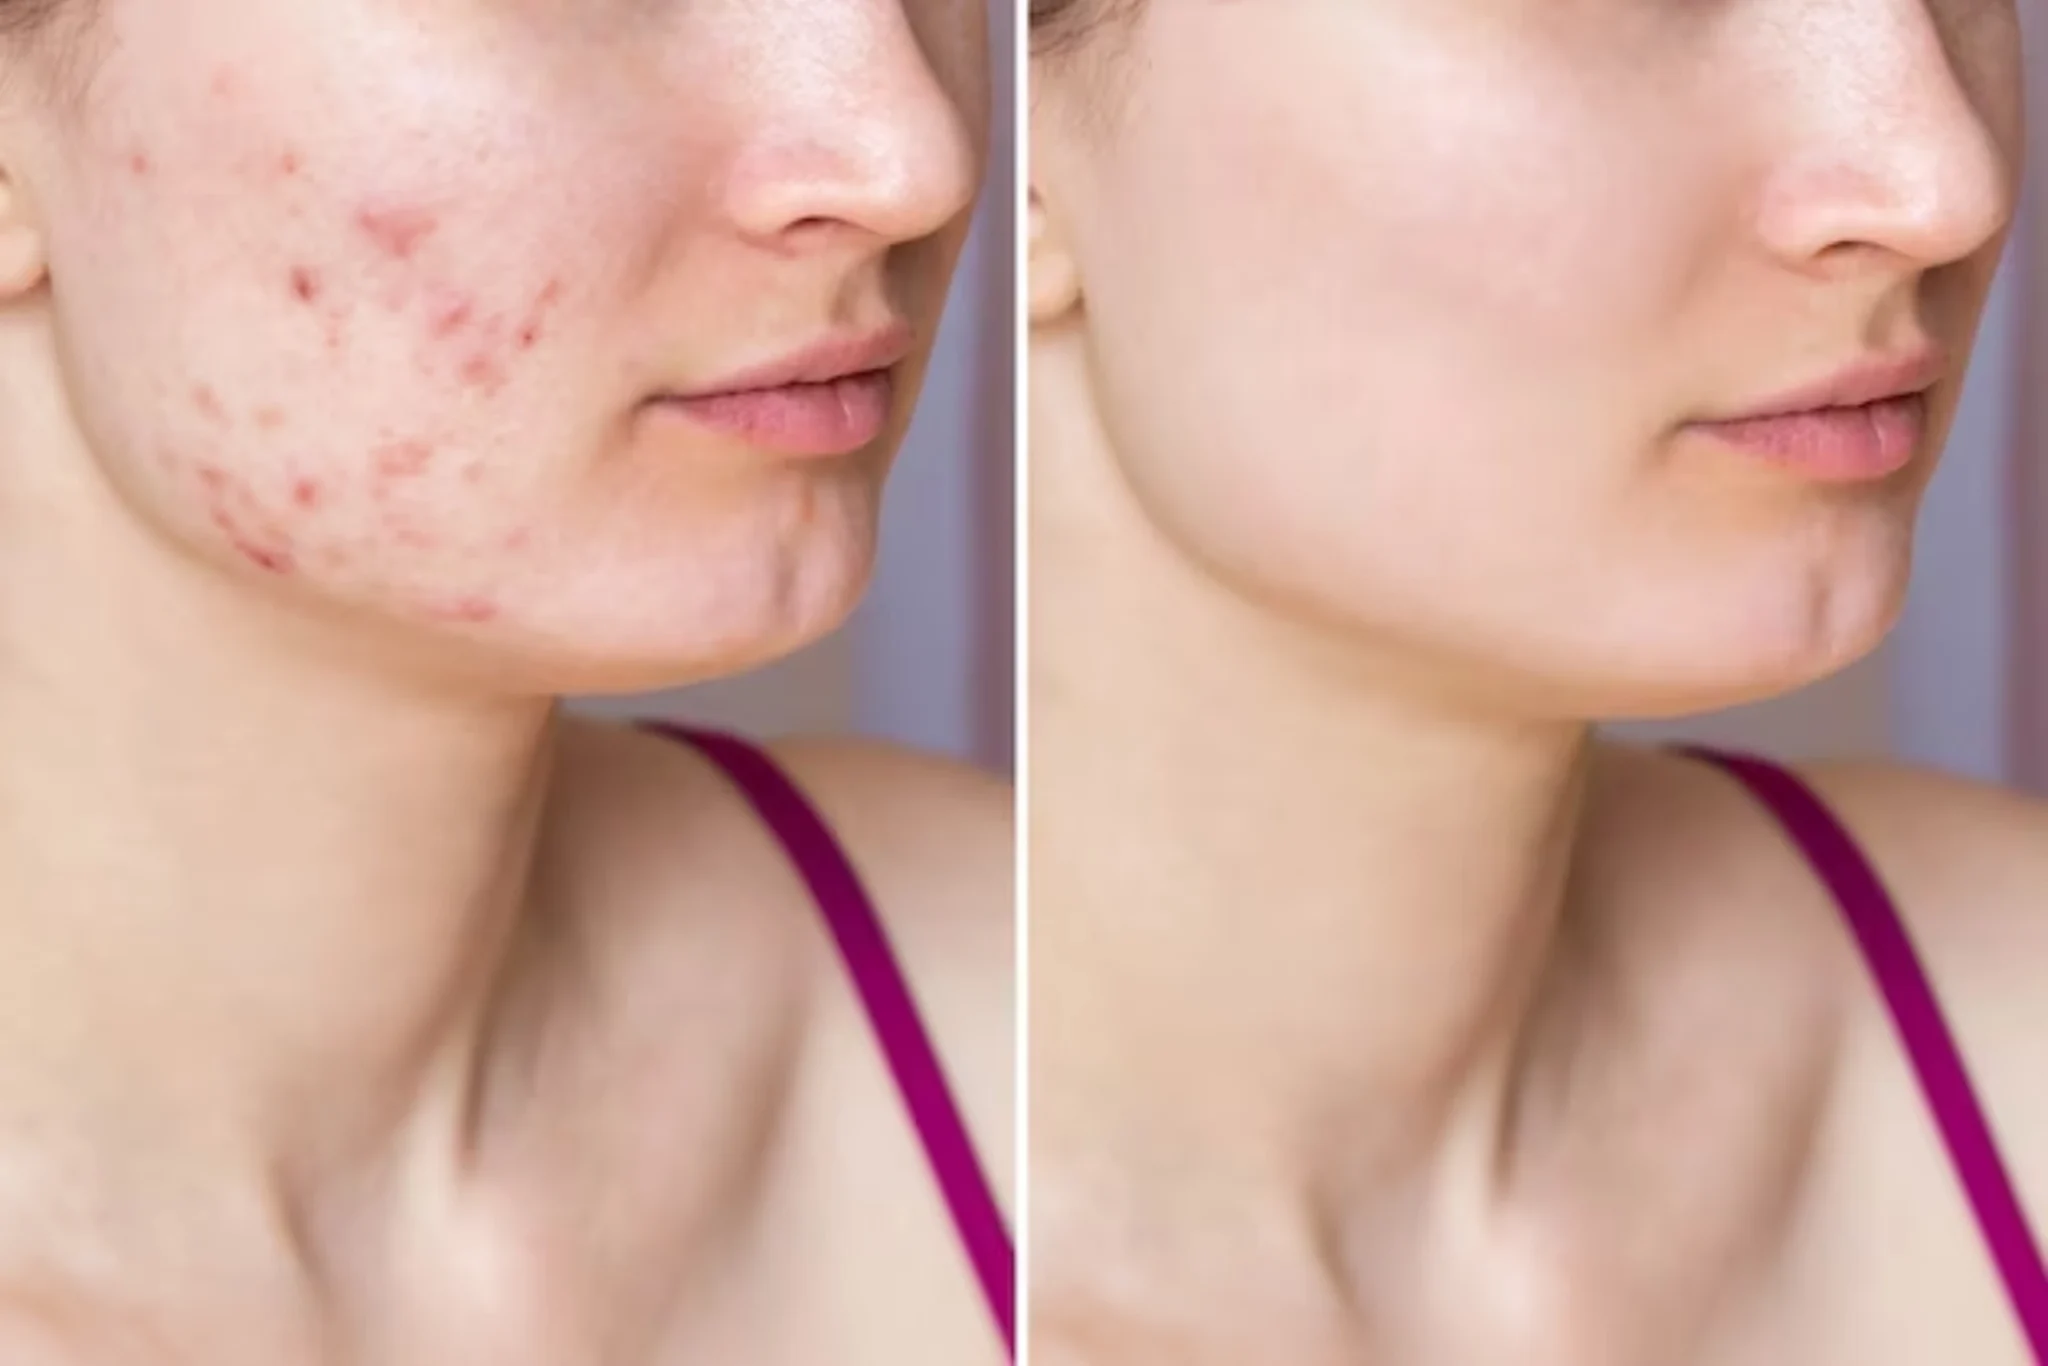 before and after results of pimples treatment